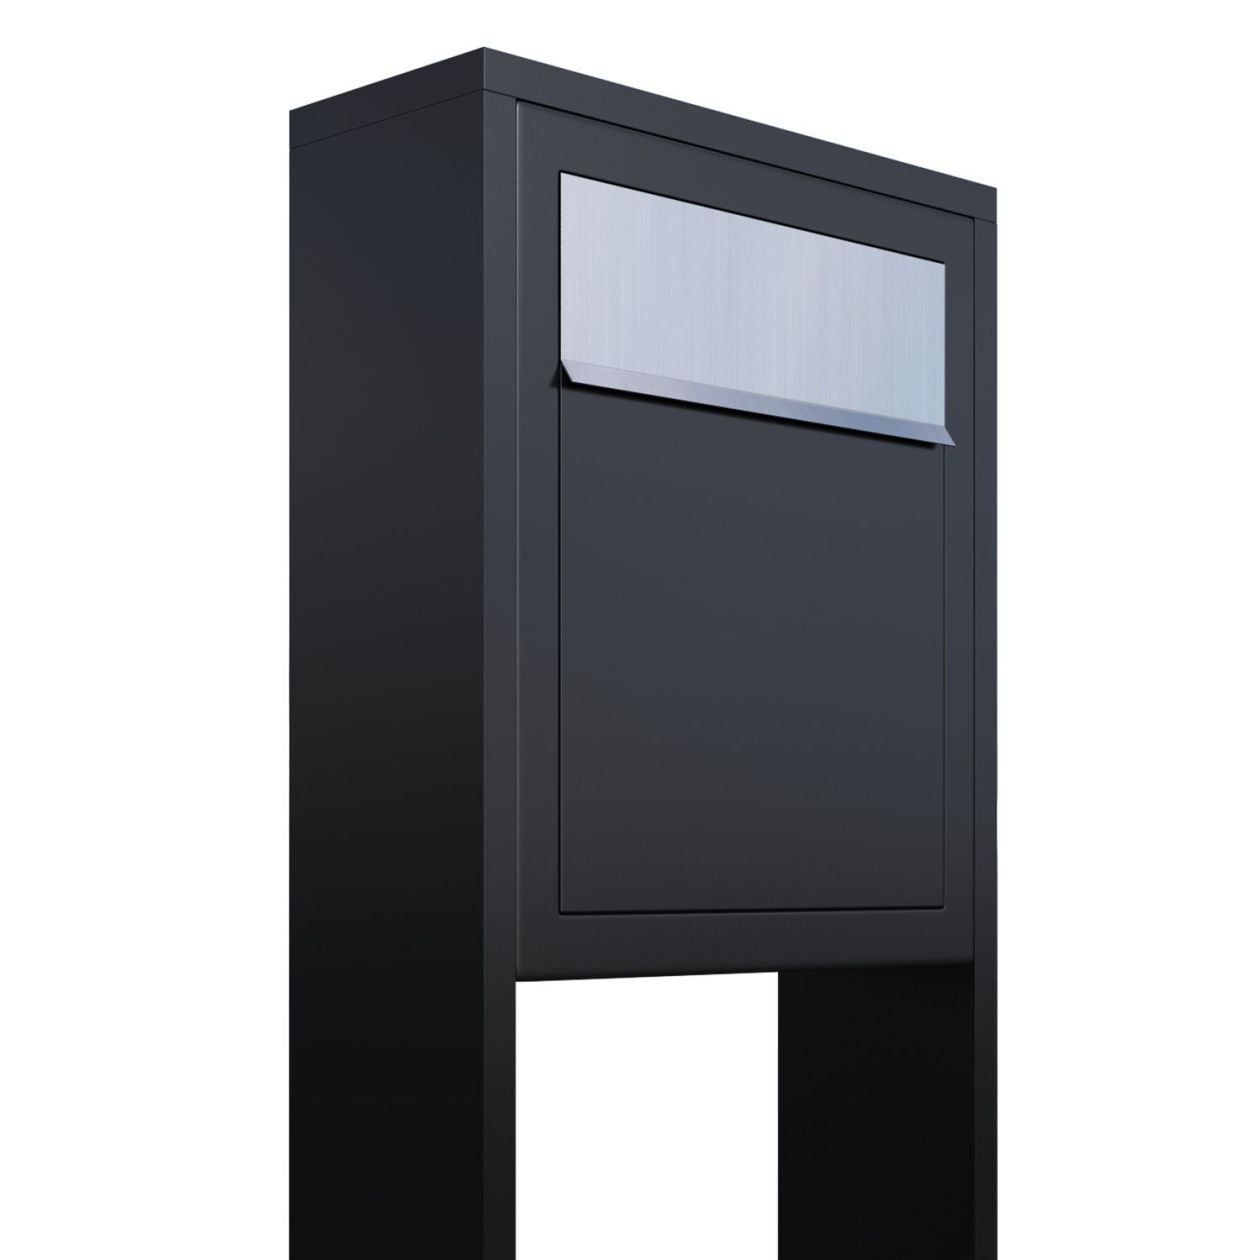 STAND ELEGANCE by Bravios - Modern post-mounted stainless steel mailbo